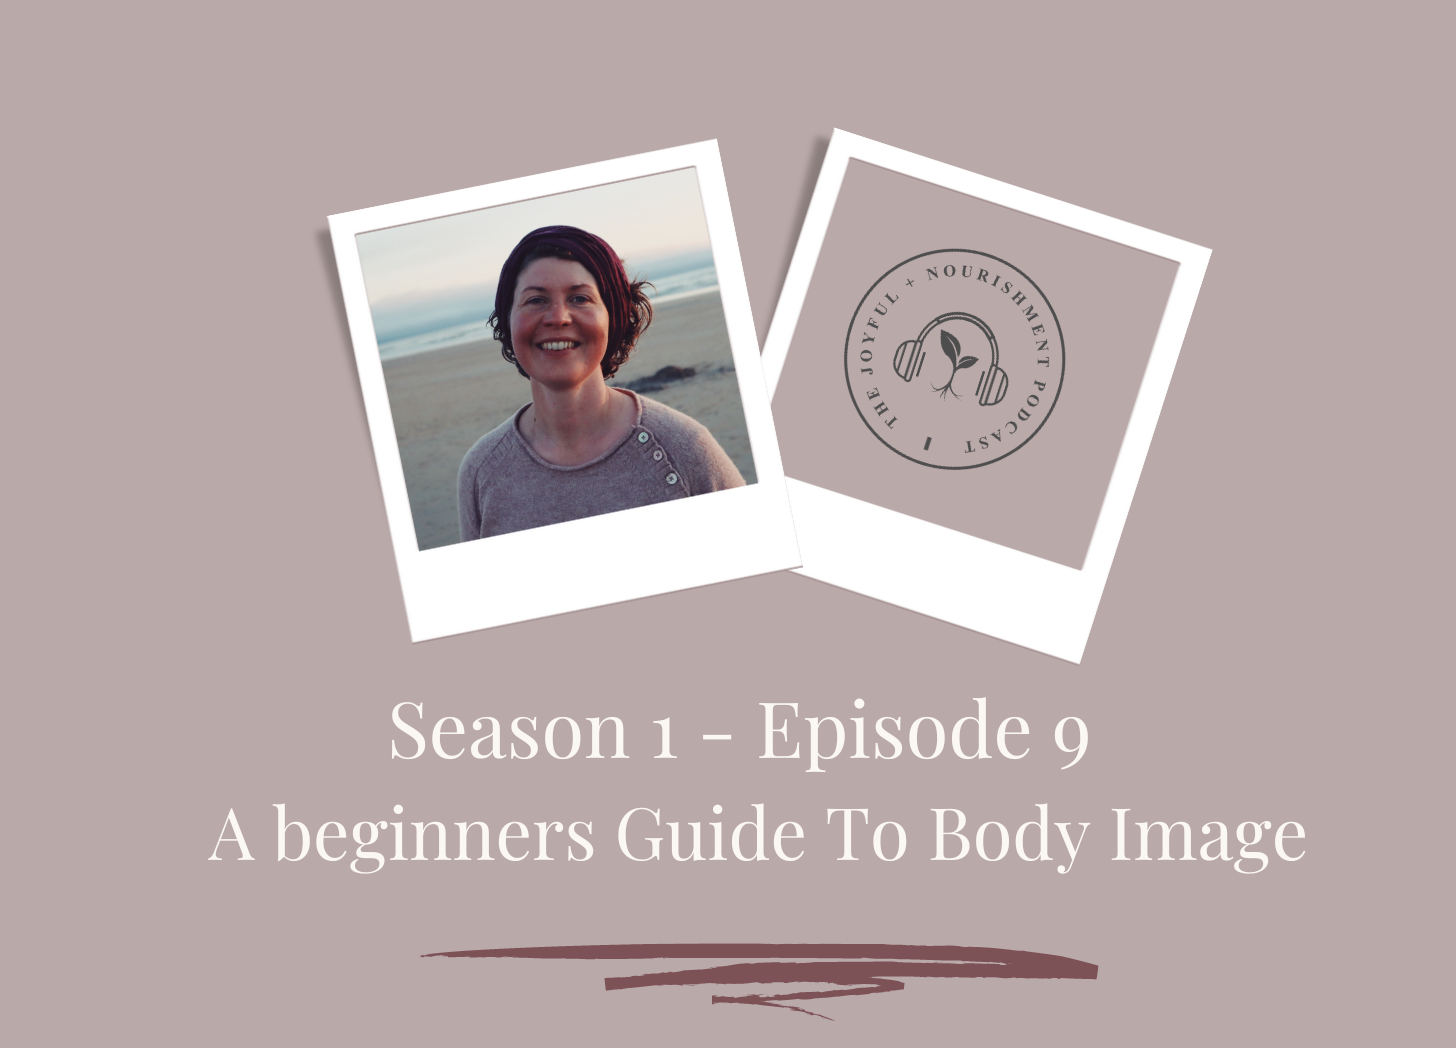 SE1-Ep9: Body Image for beginners